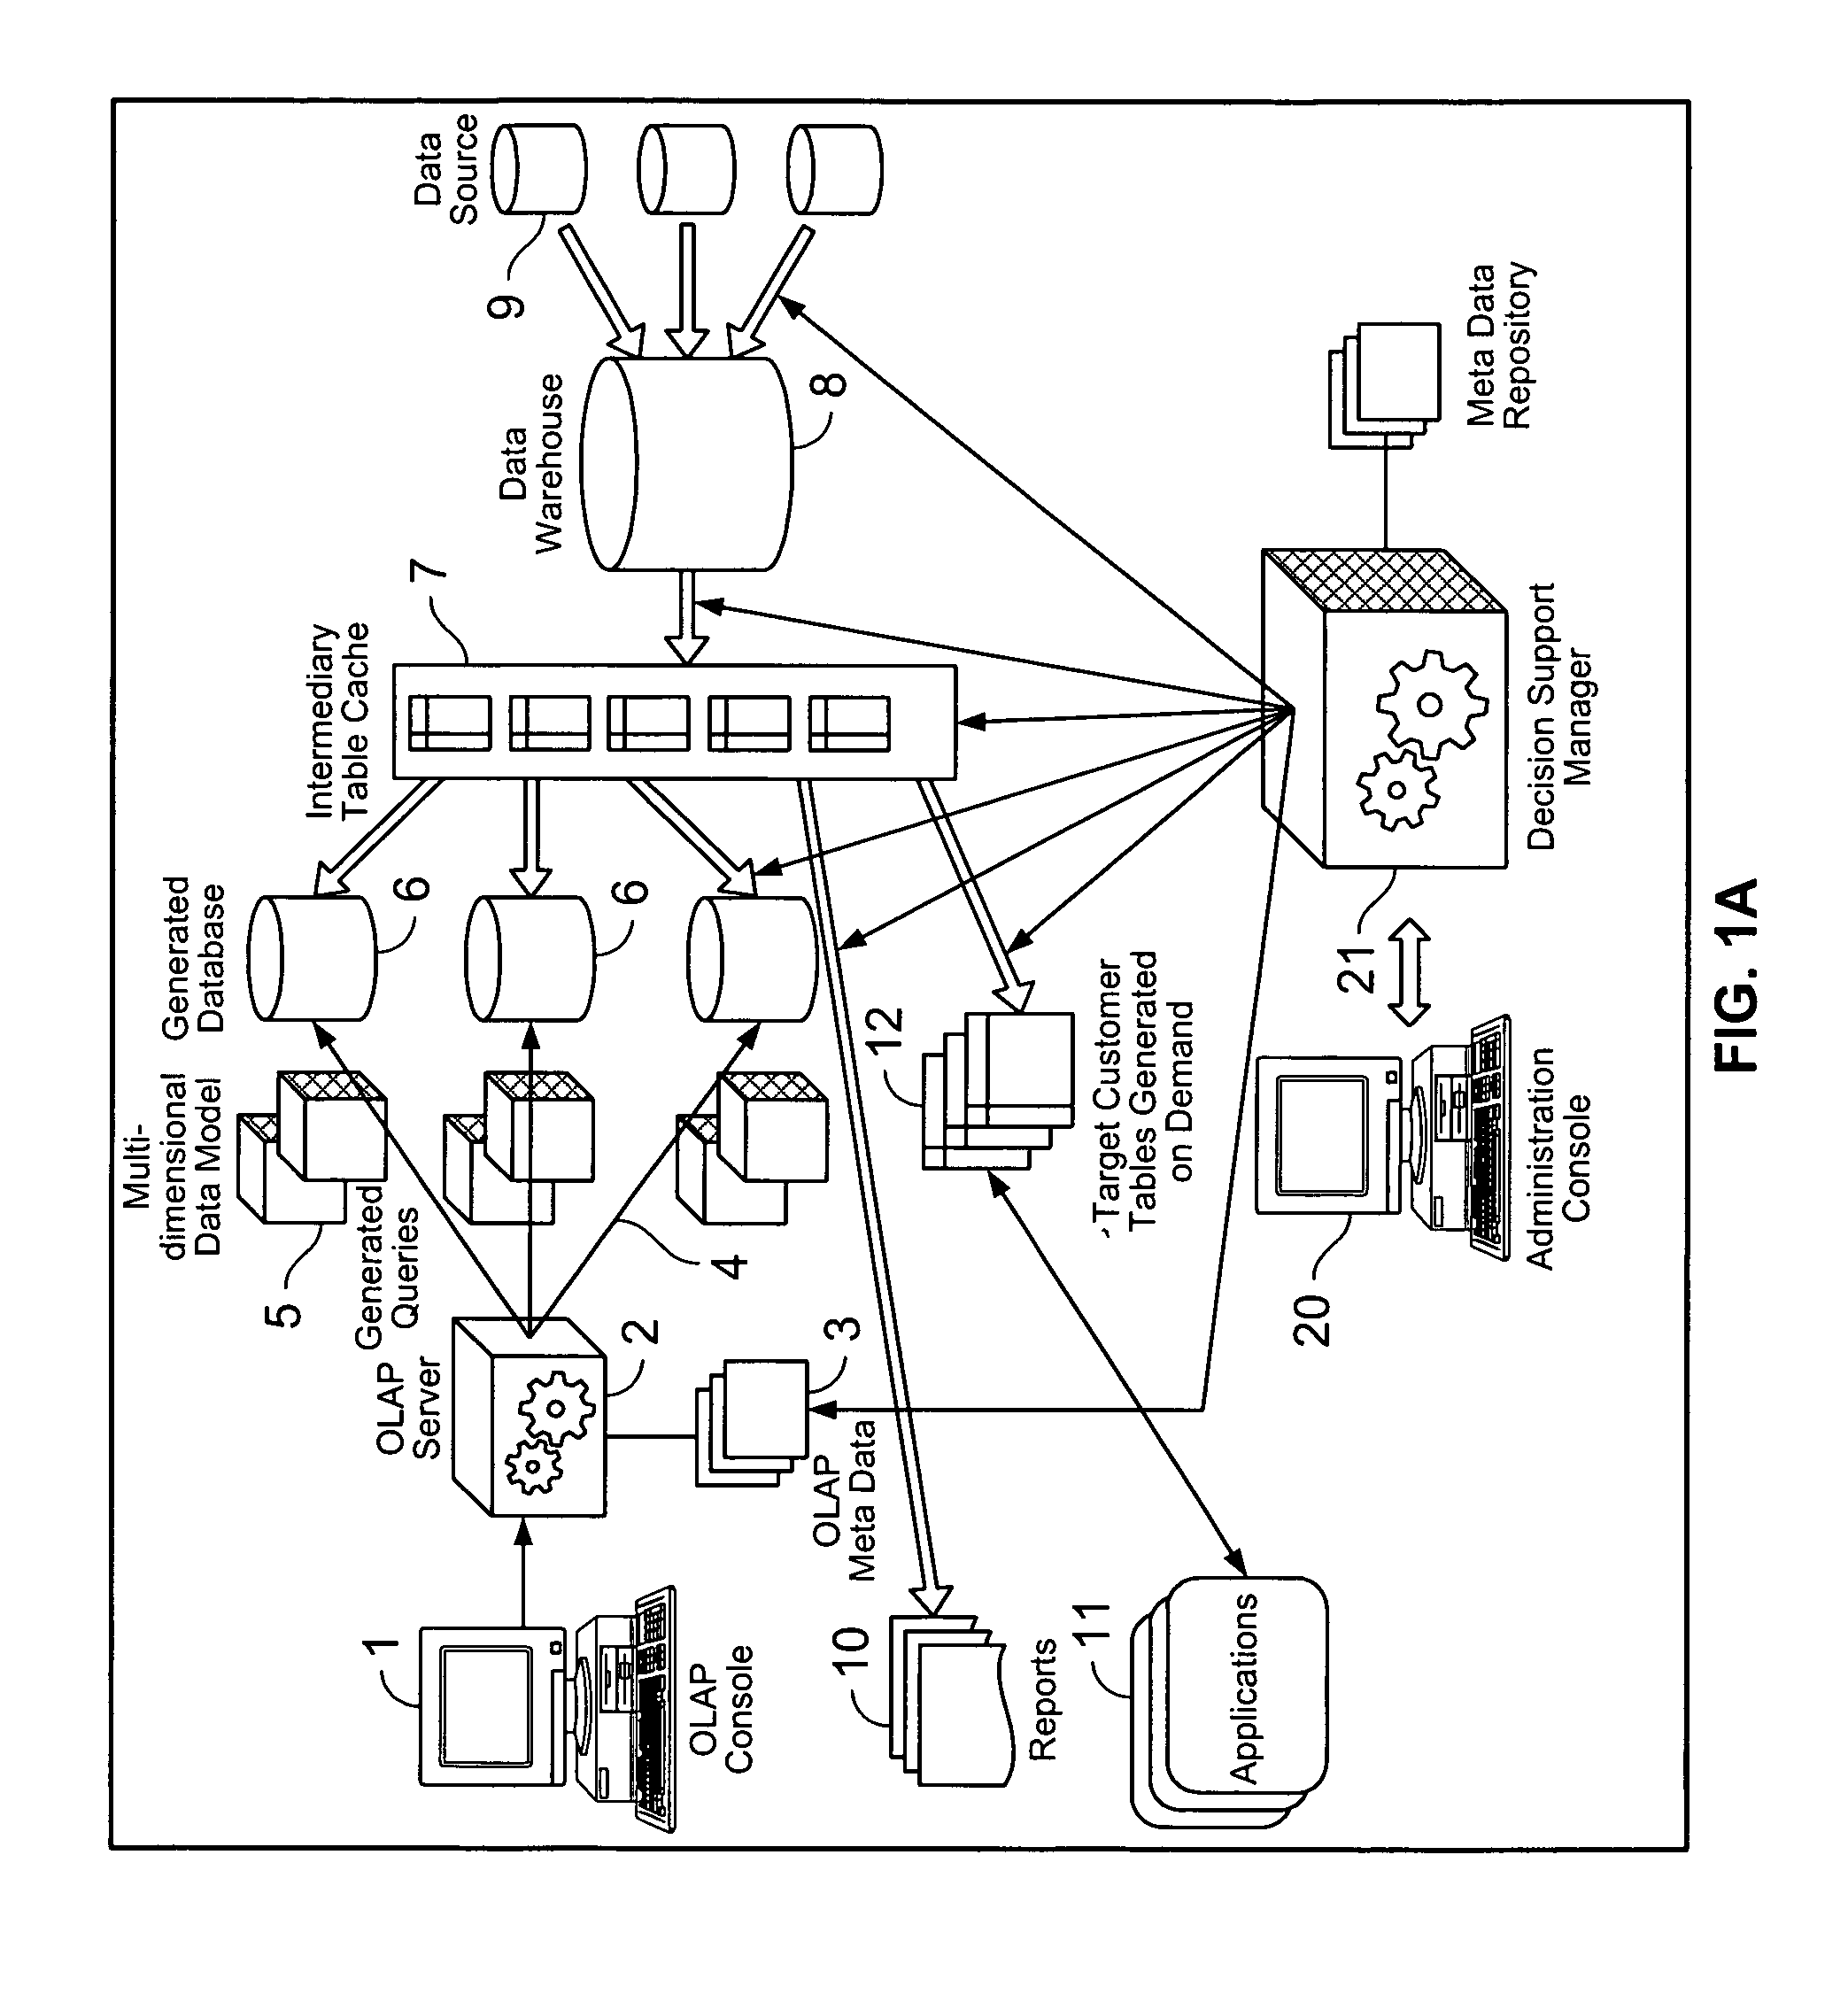 System for visualizing information in a data warehousing environment